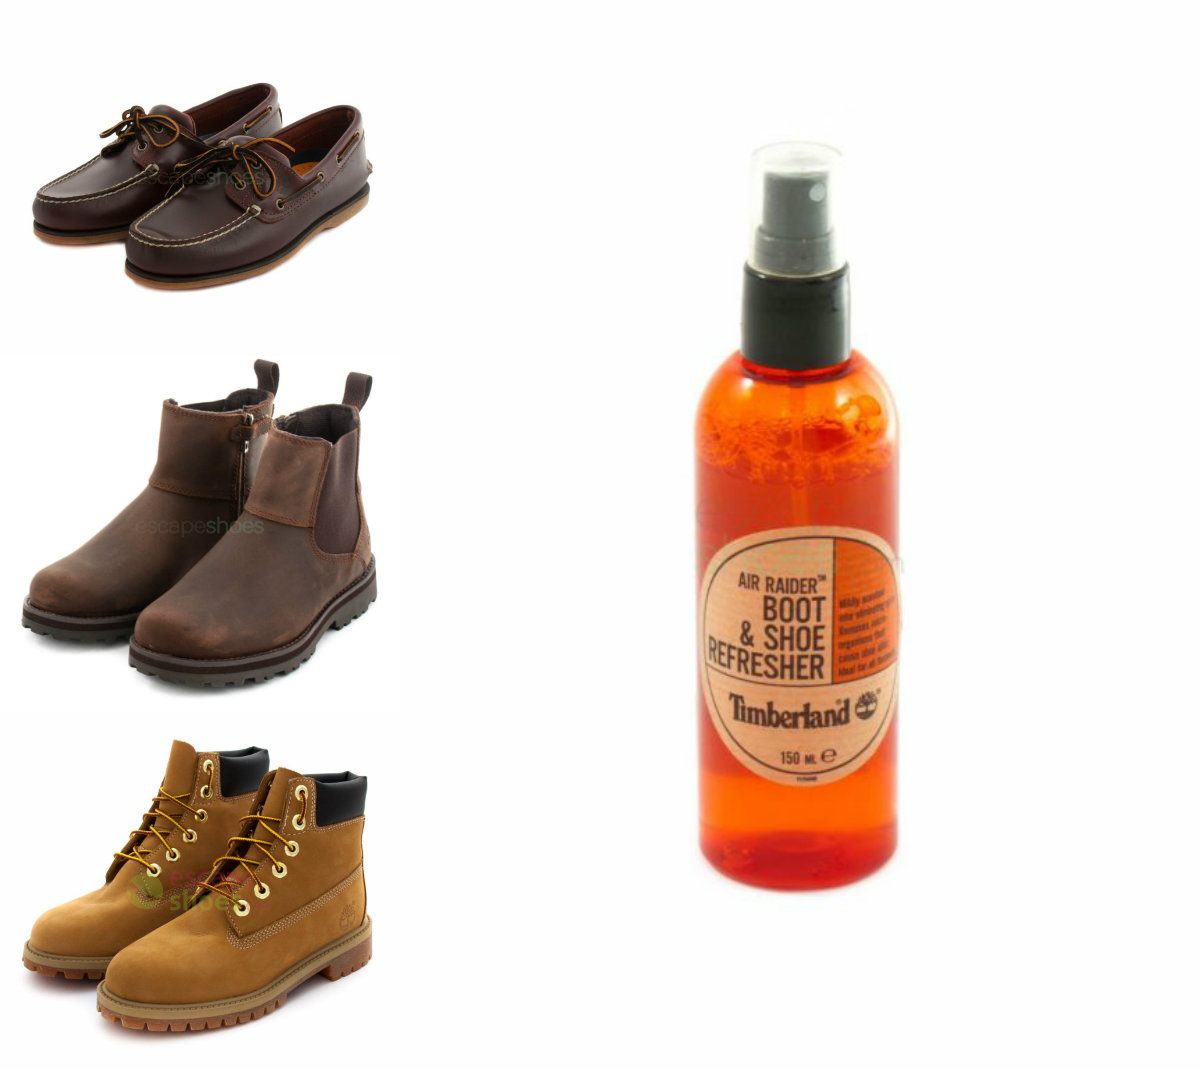 Take care of your Timberland shoes